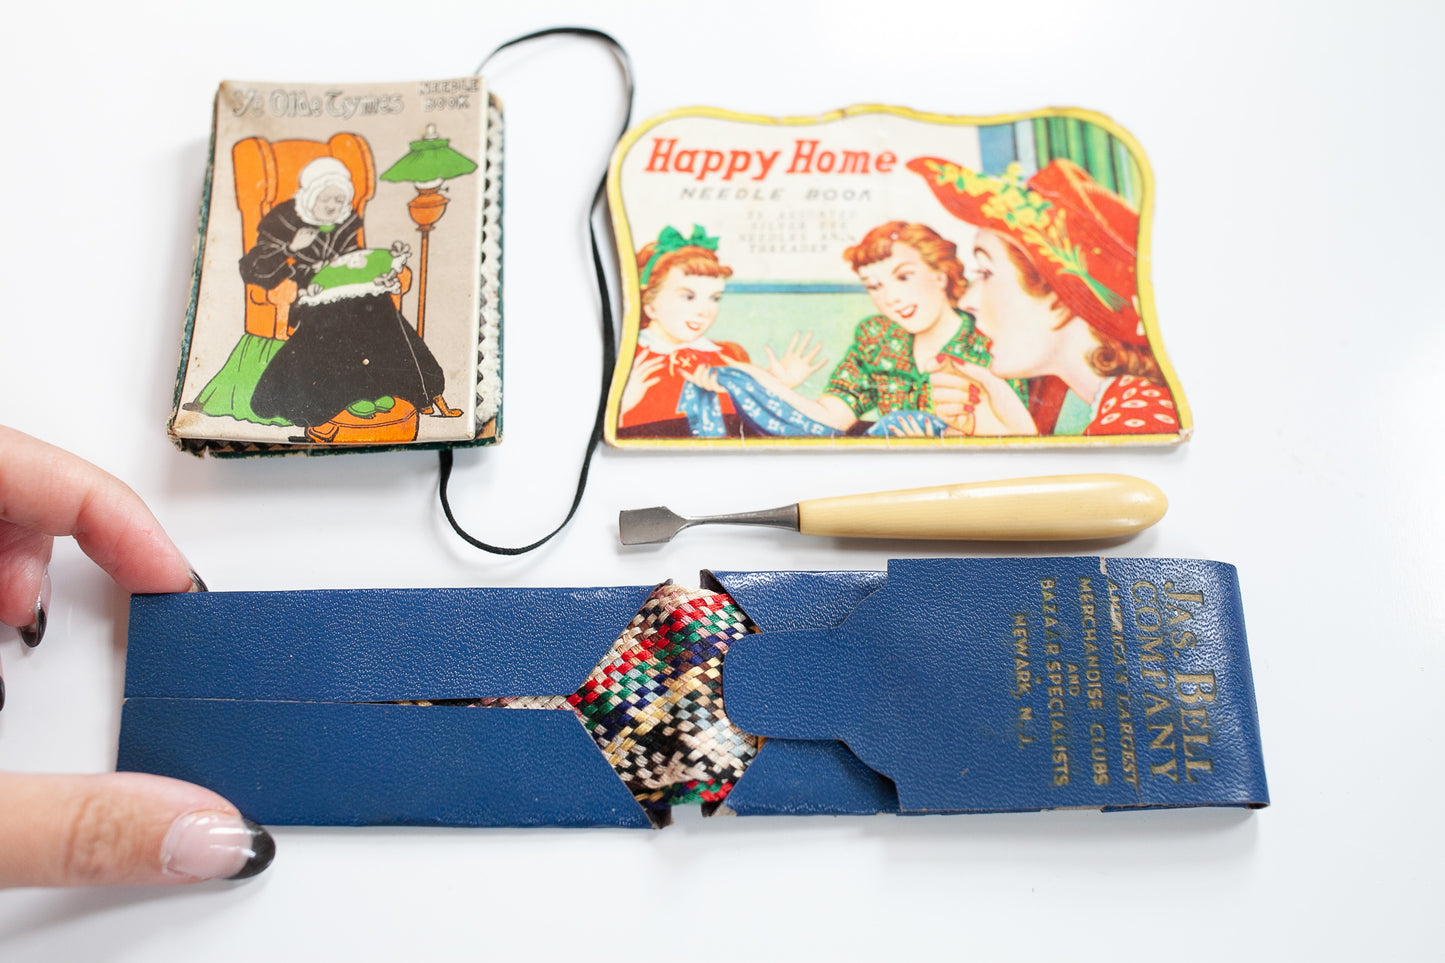 Vintage Sewing- Sewing Needle Books -Sewing Kit